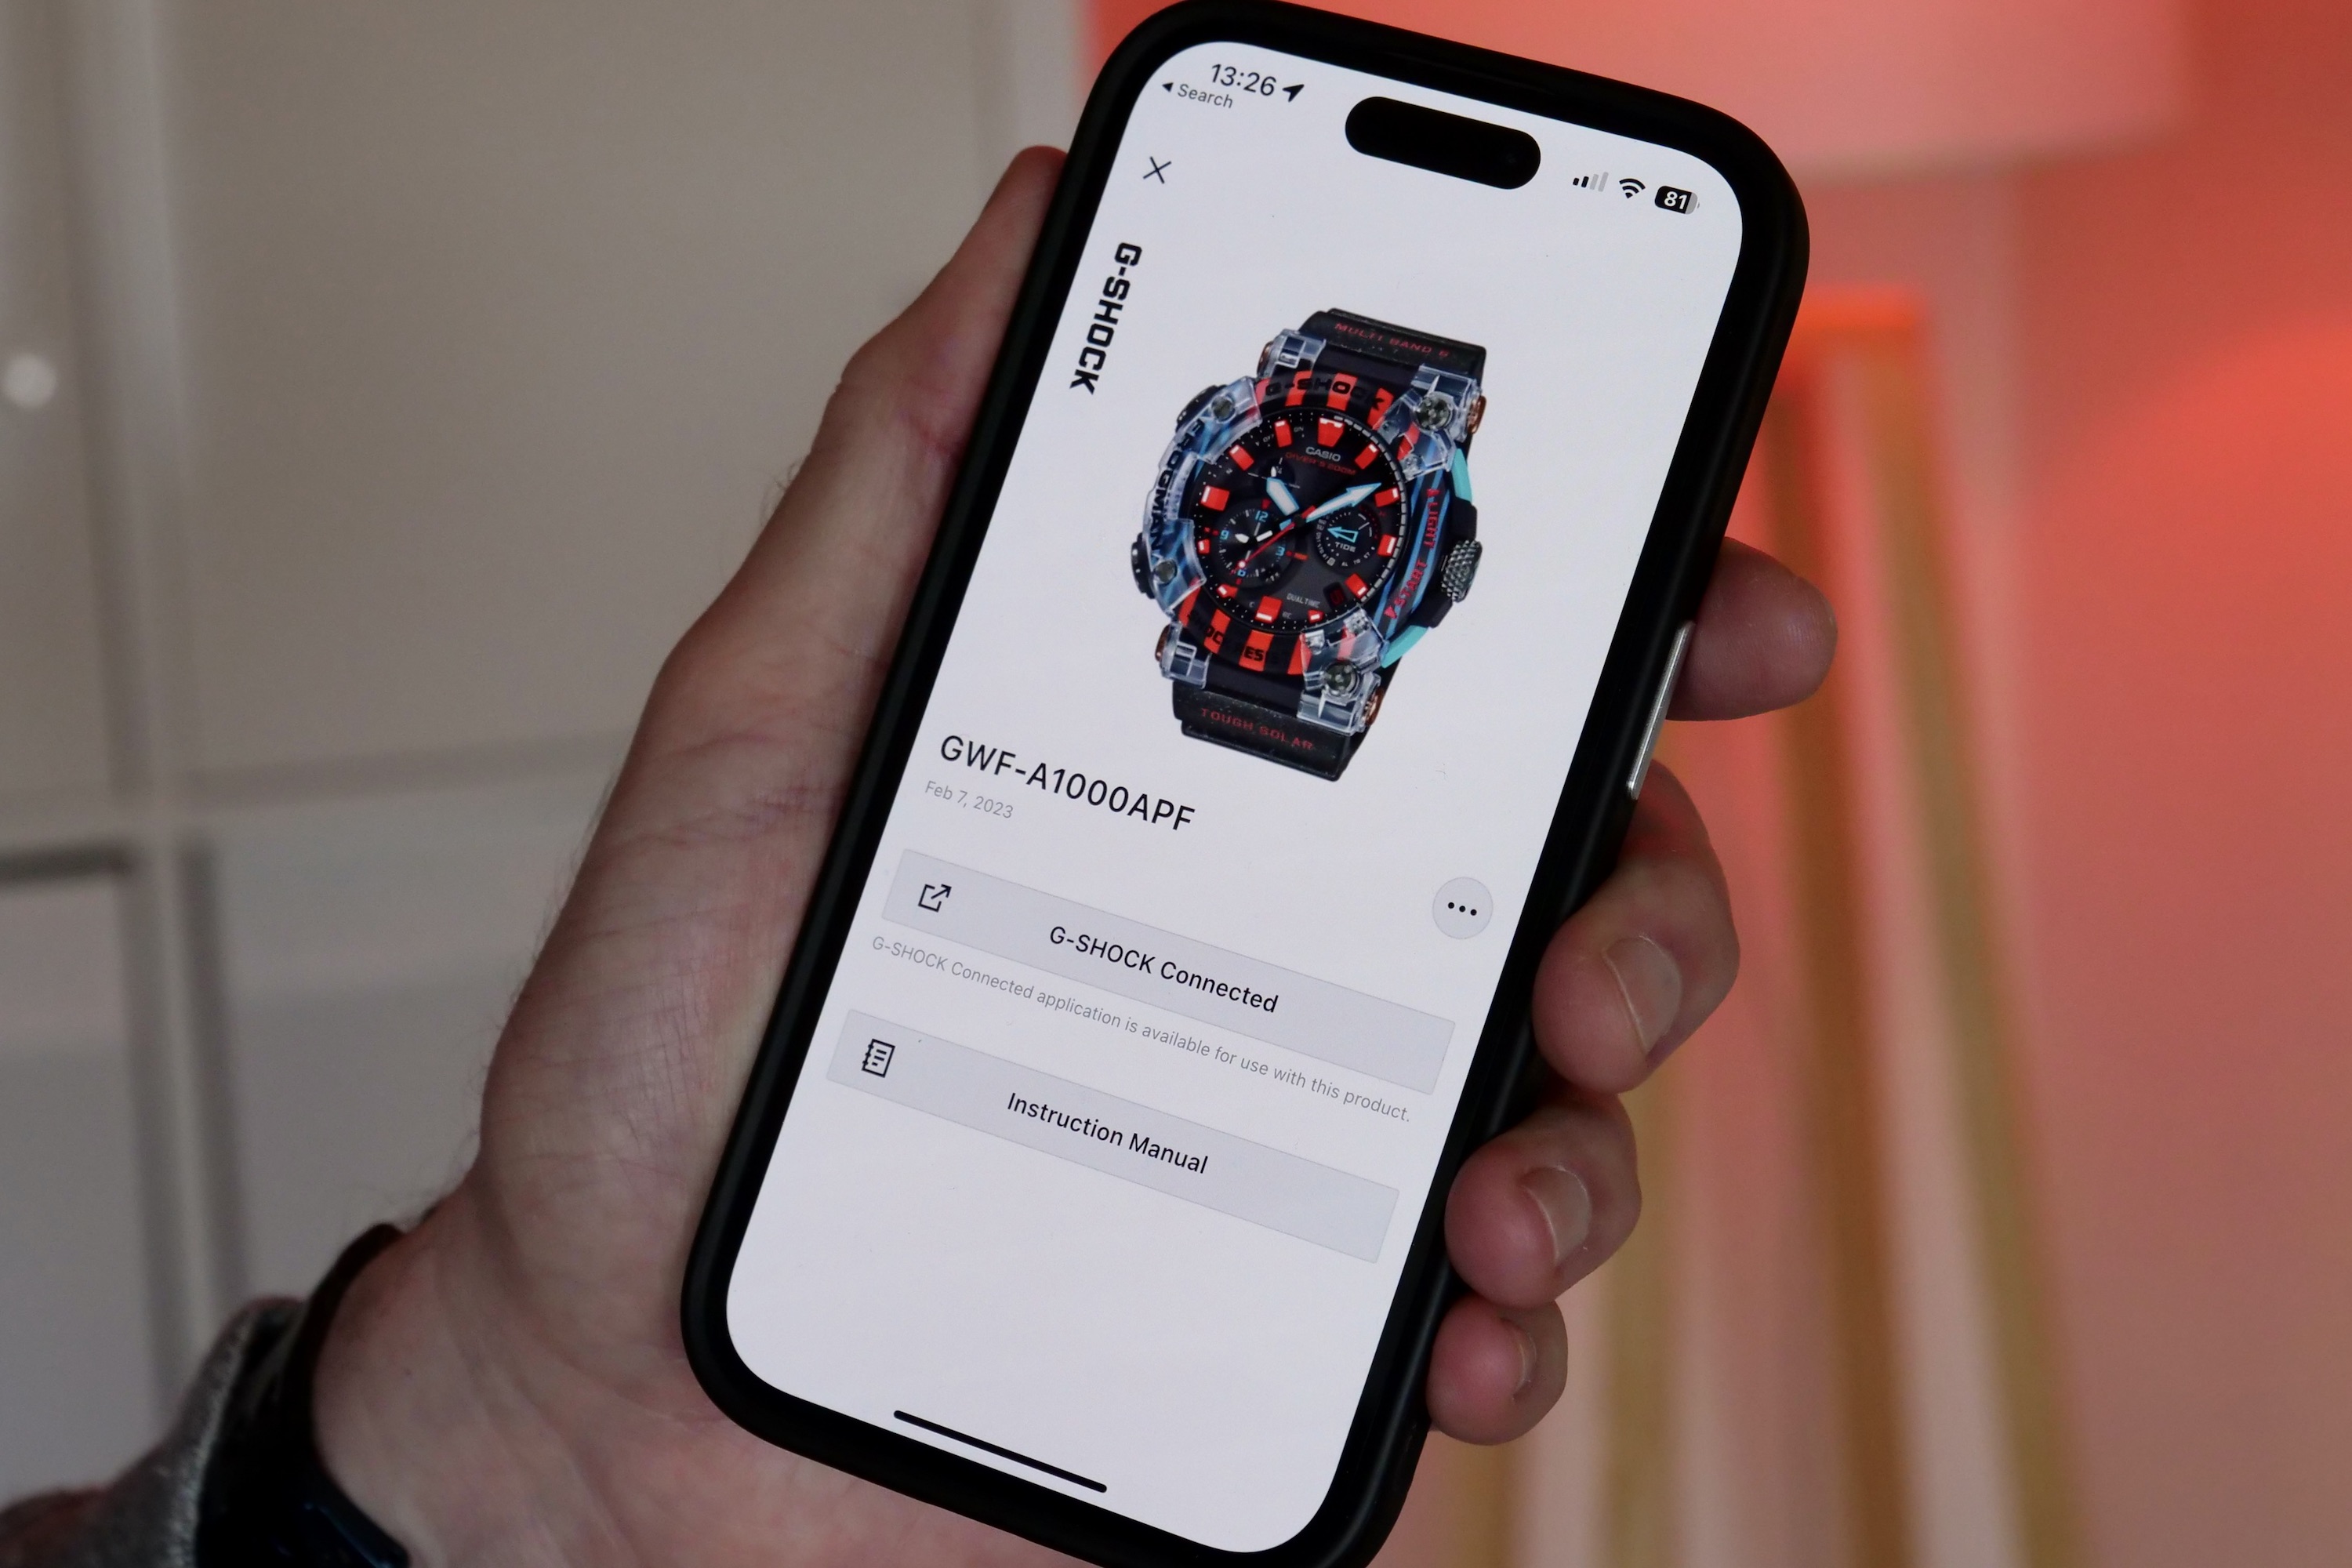 Casio's G-Shock Connected app for the G-Shock Poison Dart Frog Frogman watch.